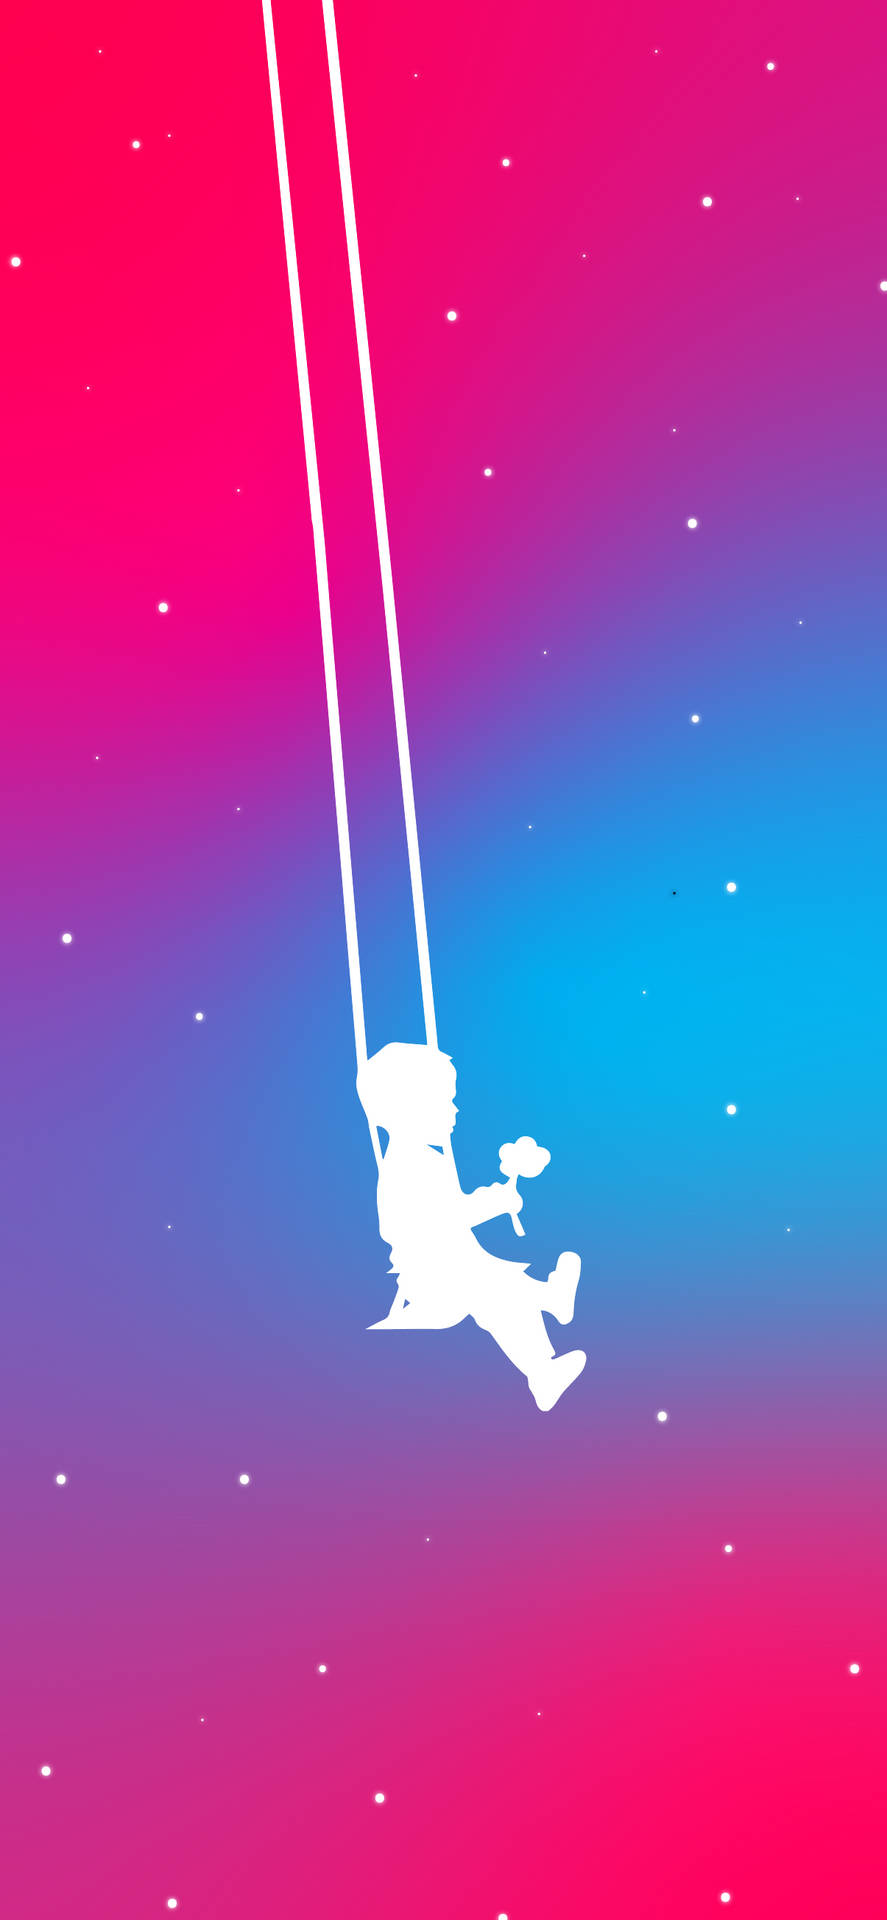 Download Pink And Blue Swing Wallpaper | Wallpapers.com